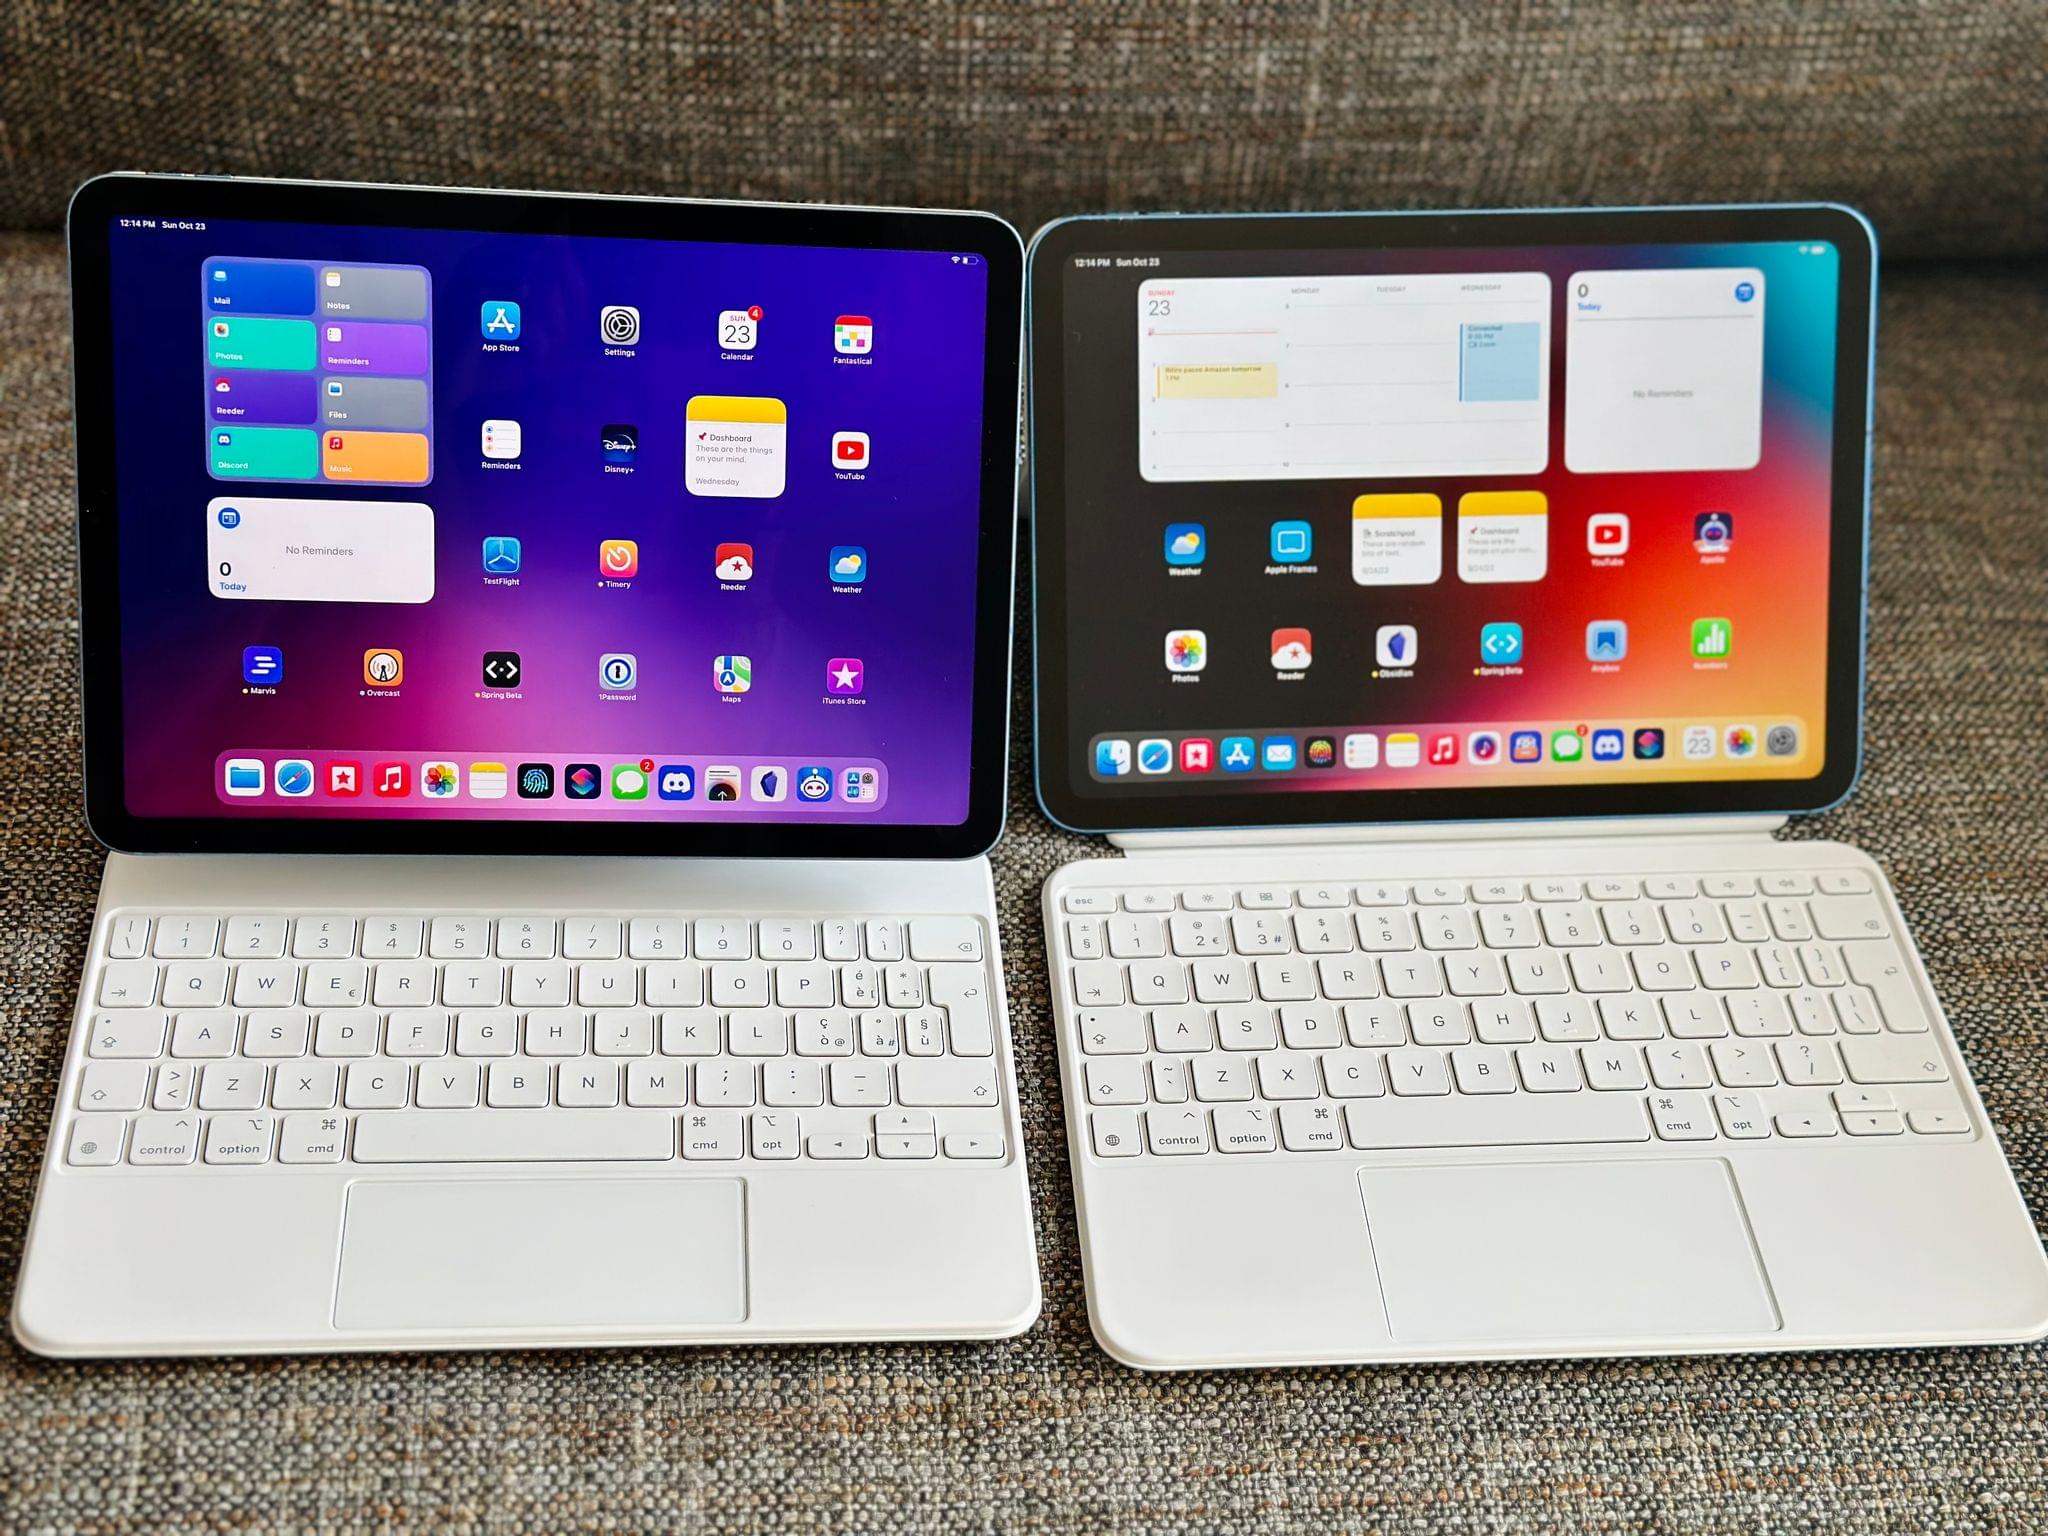 The iPad Air (left) and new iPad (right).